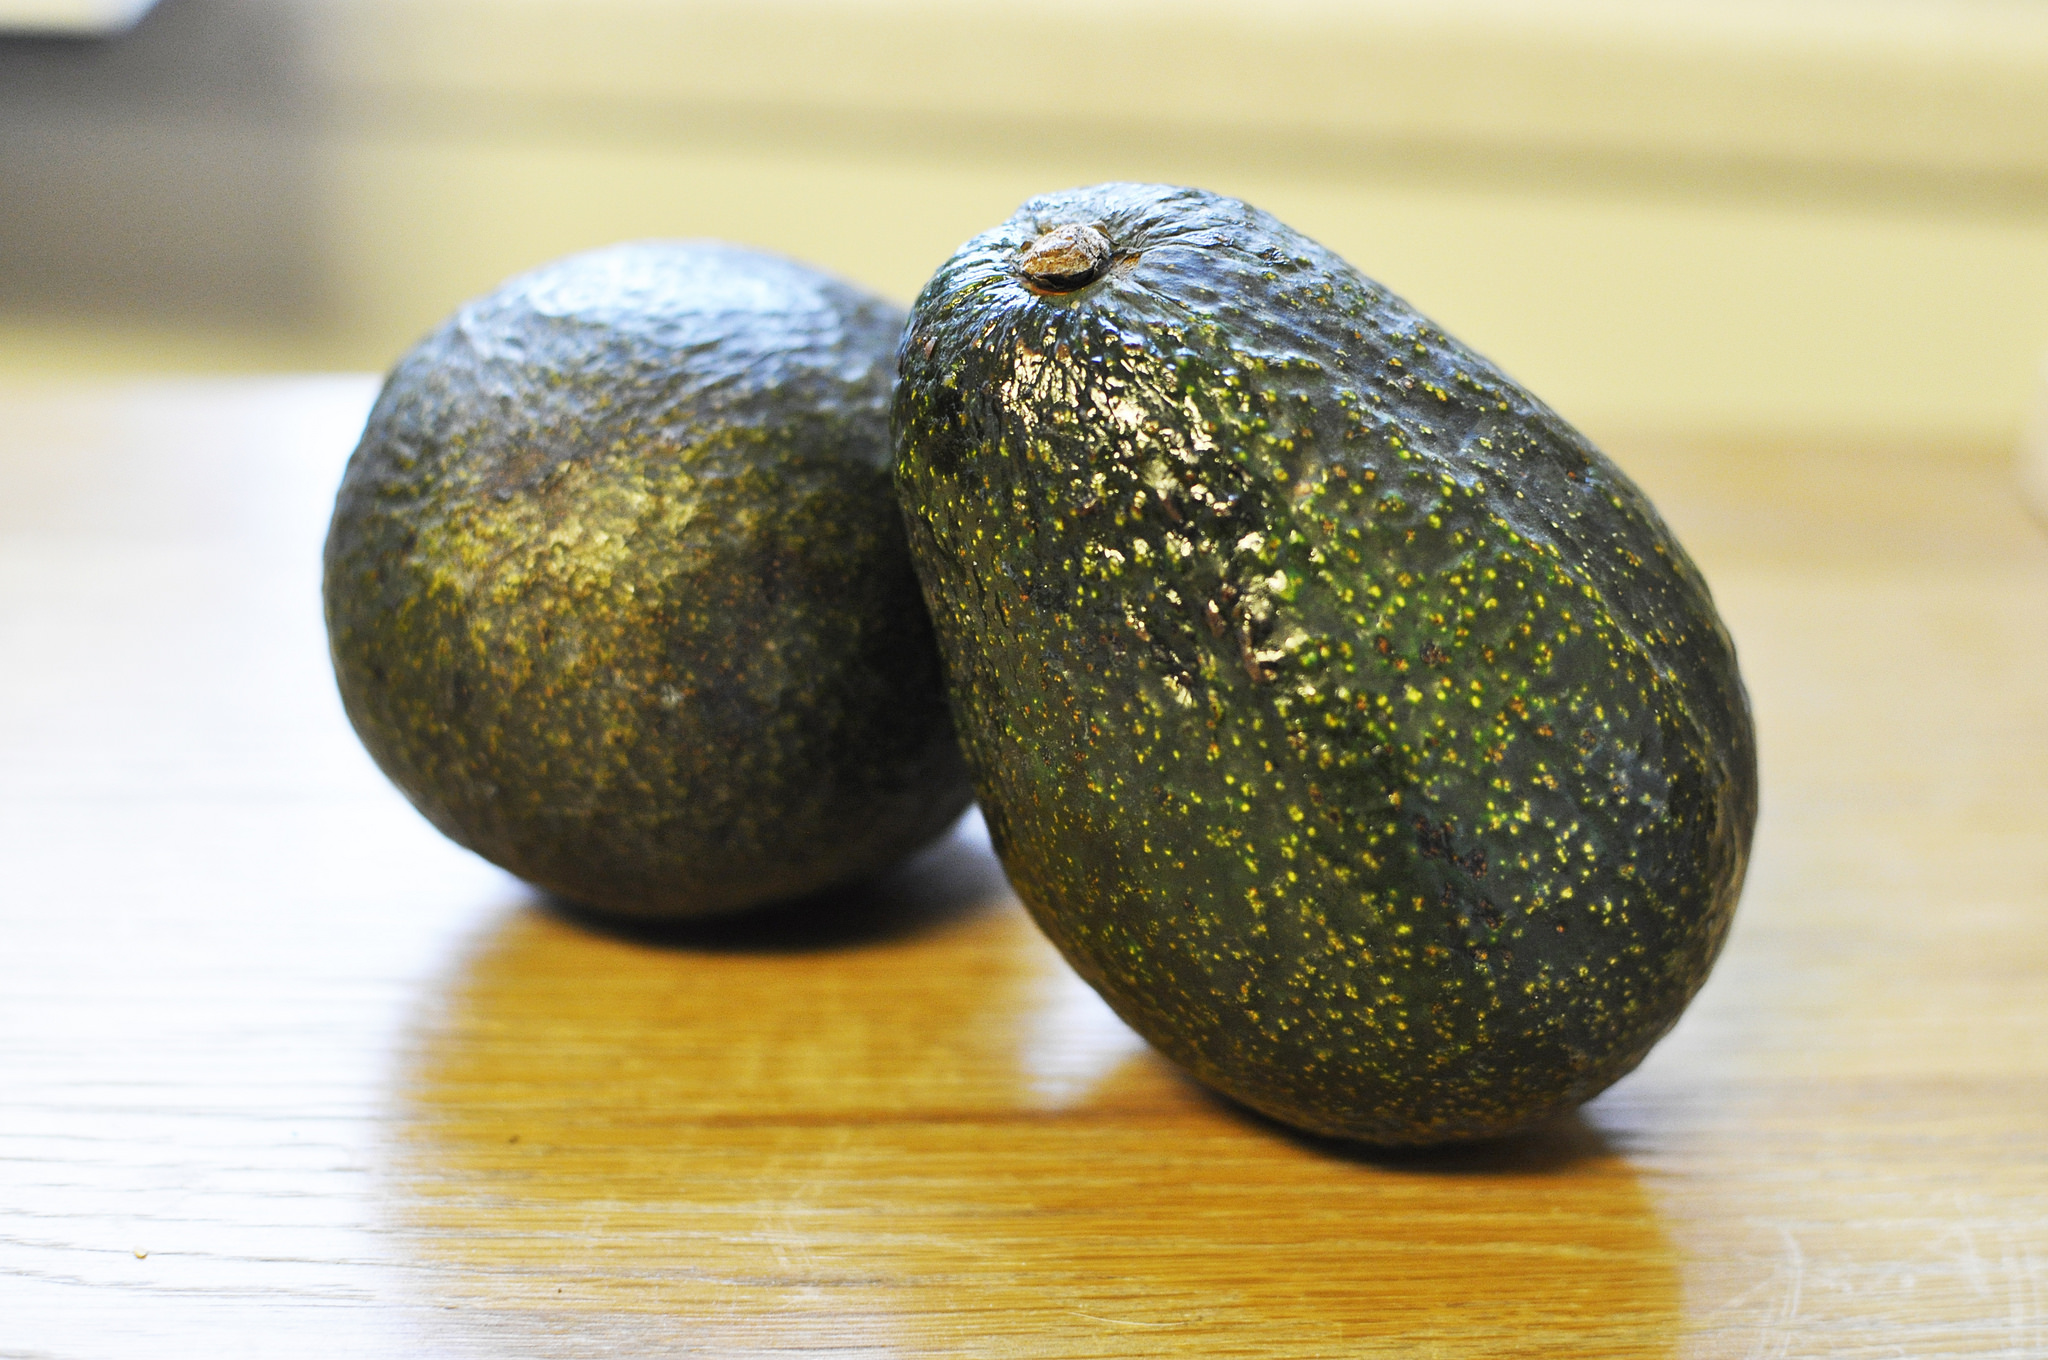 10 Things You Didn’t Know about Avocados